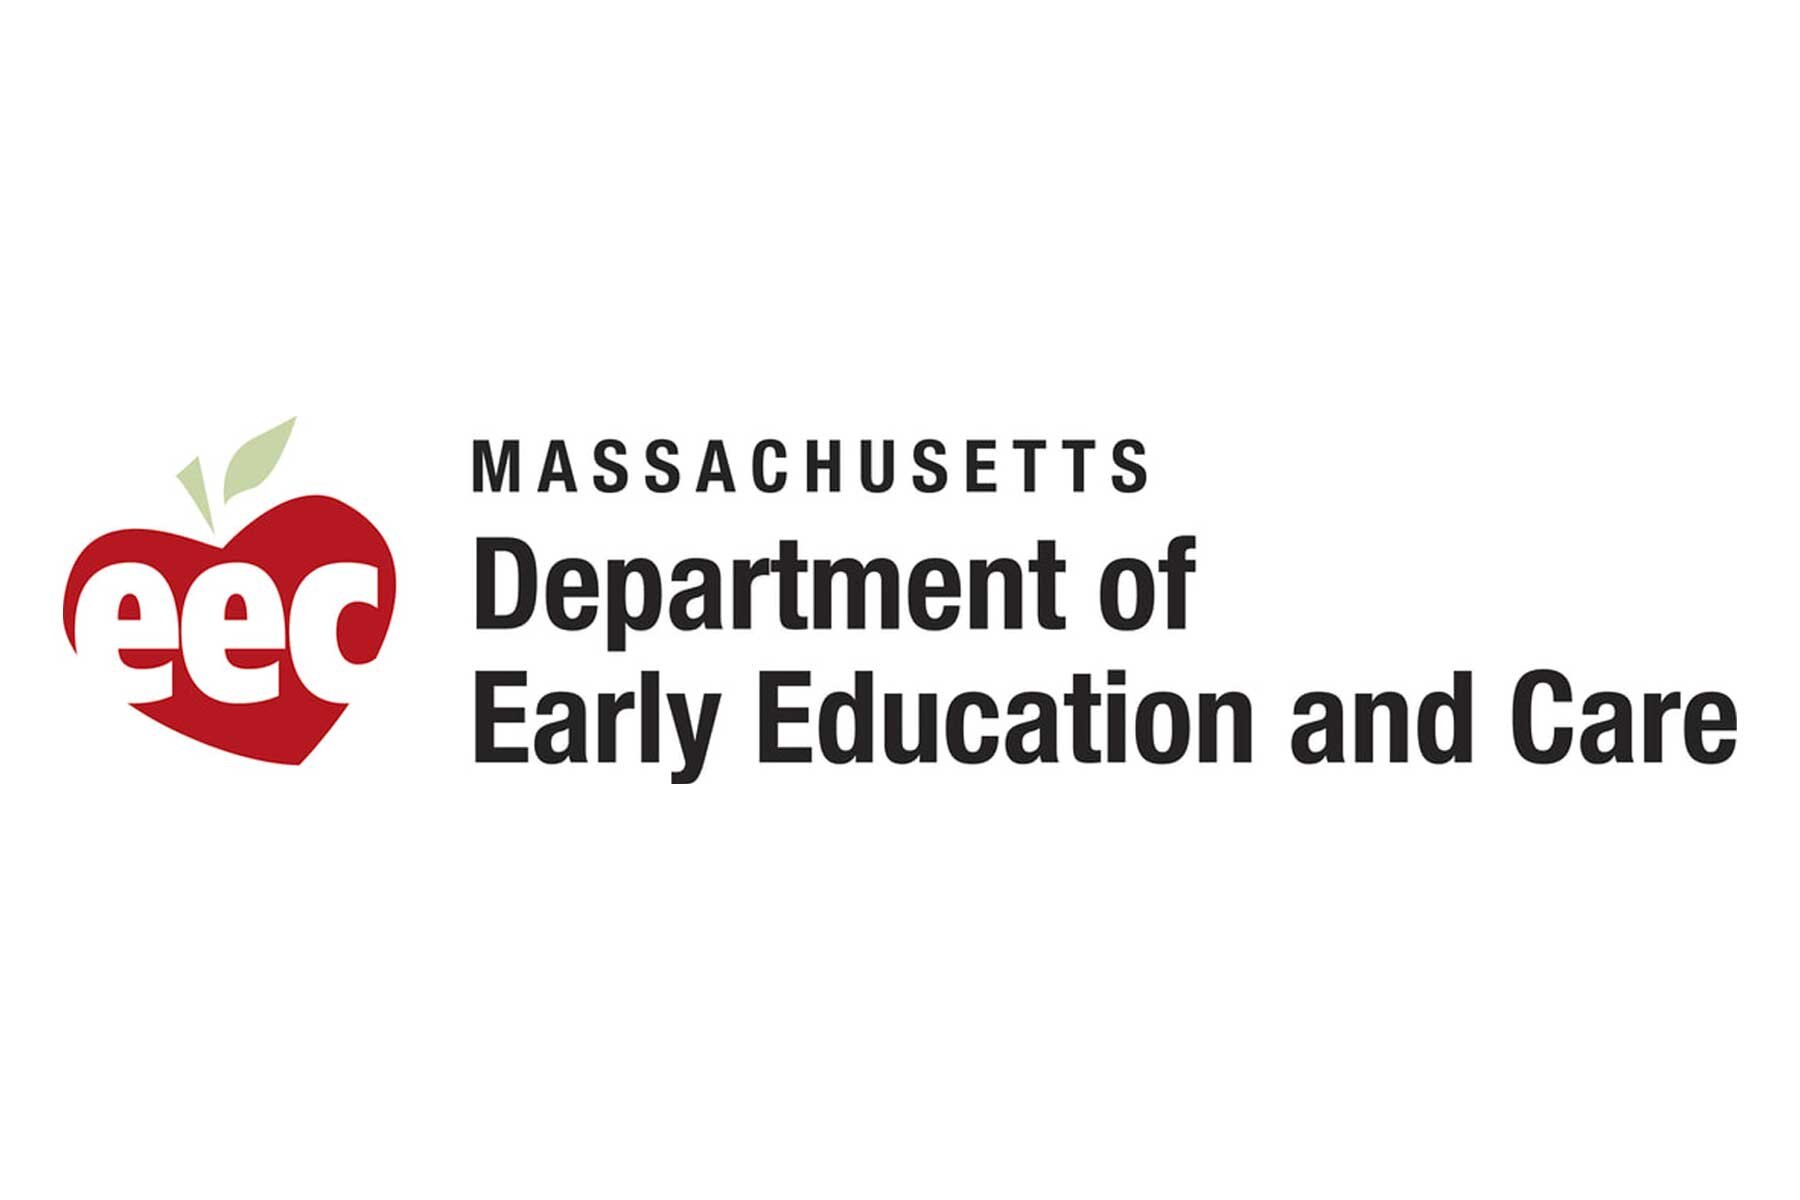 Massachusetts Department of Early Education